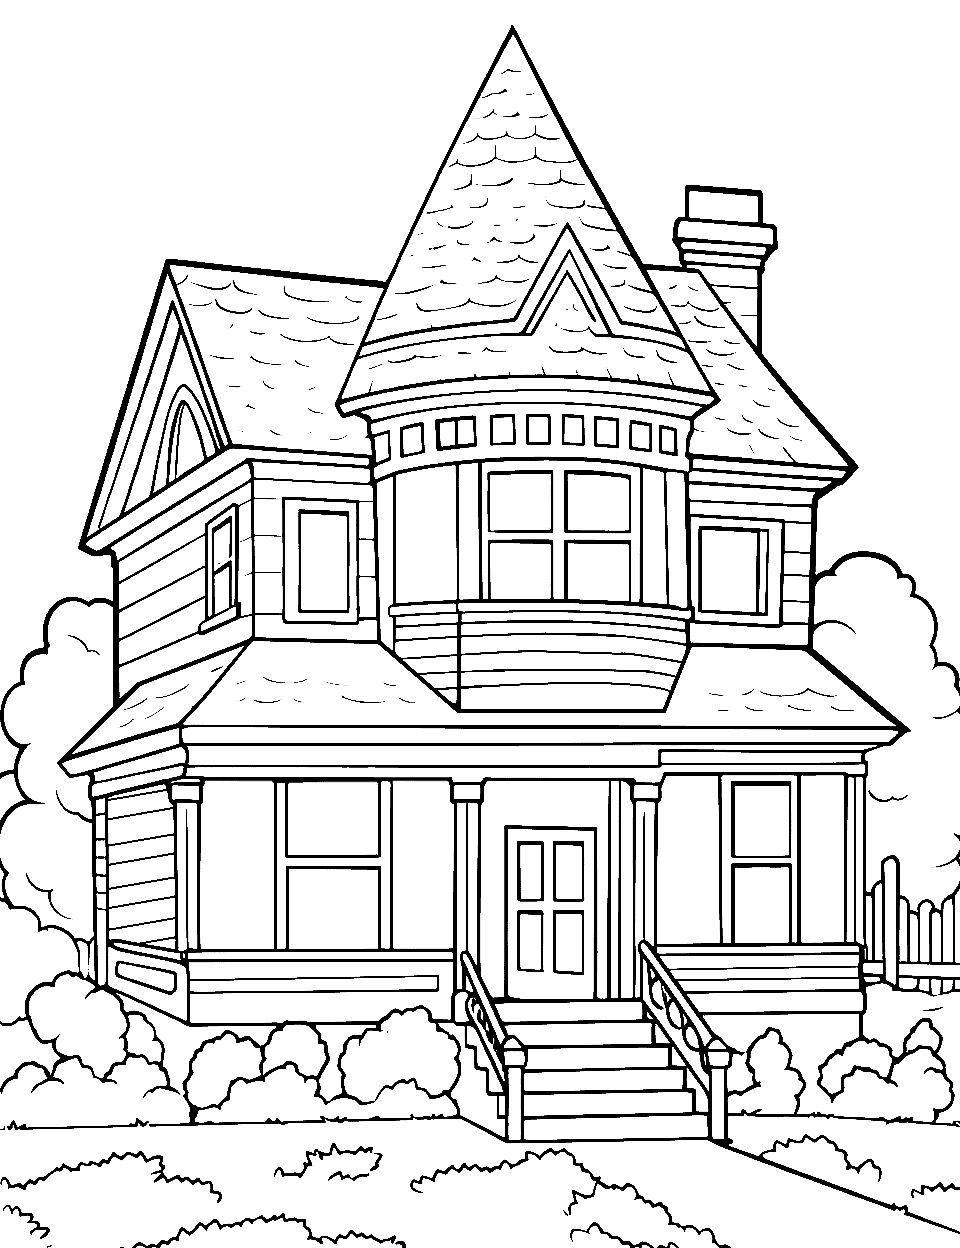 11+ Coloring Page House